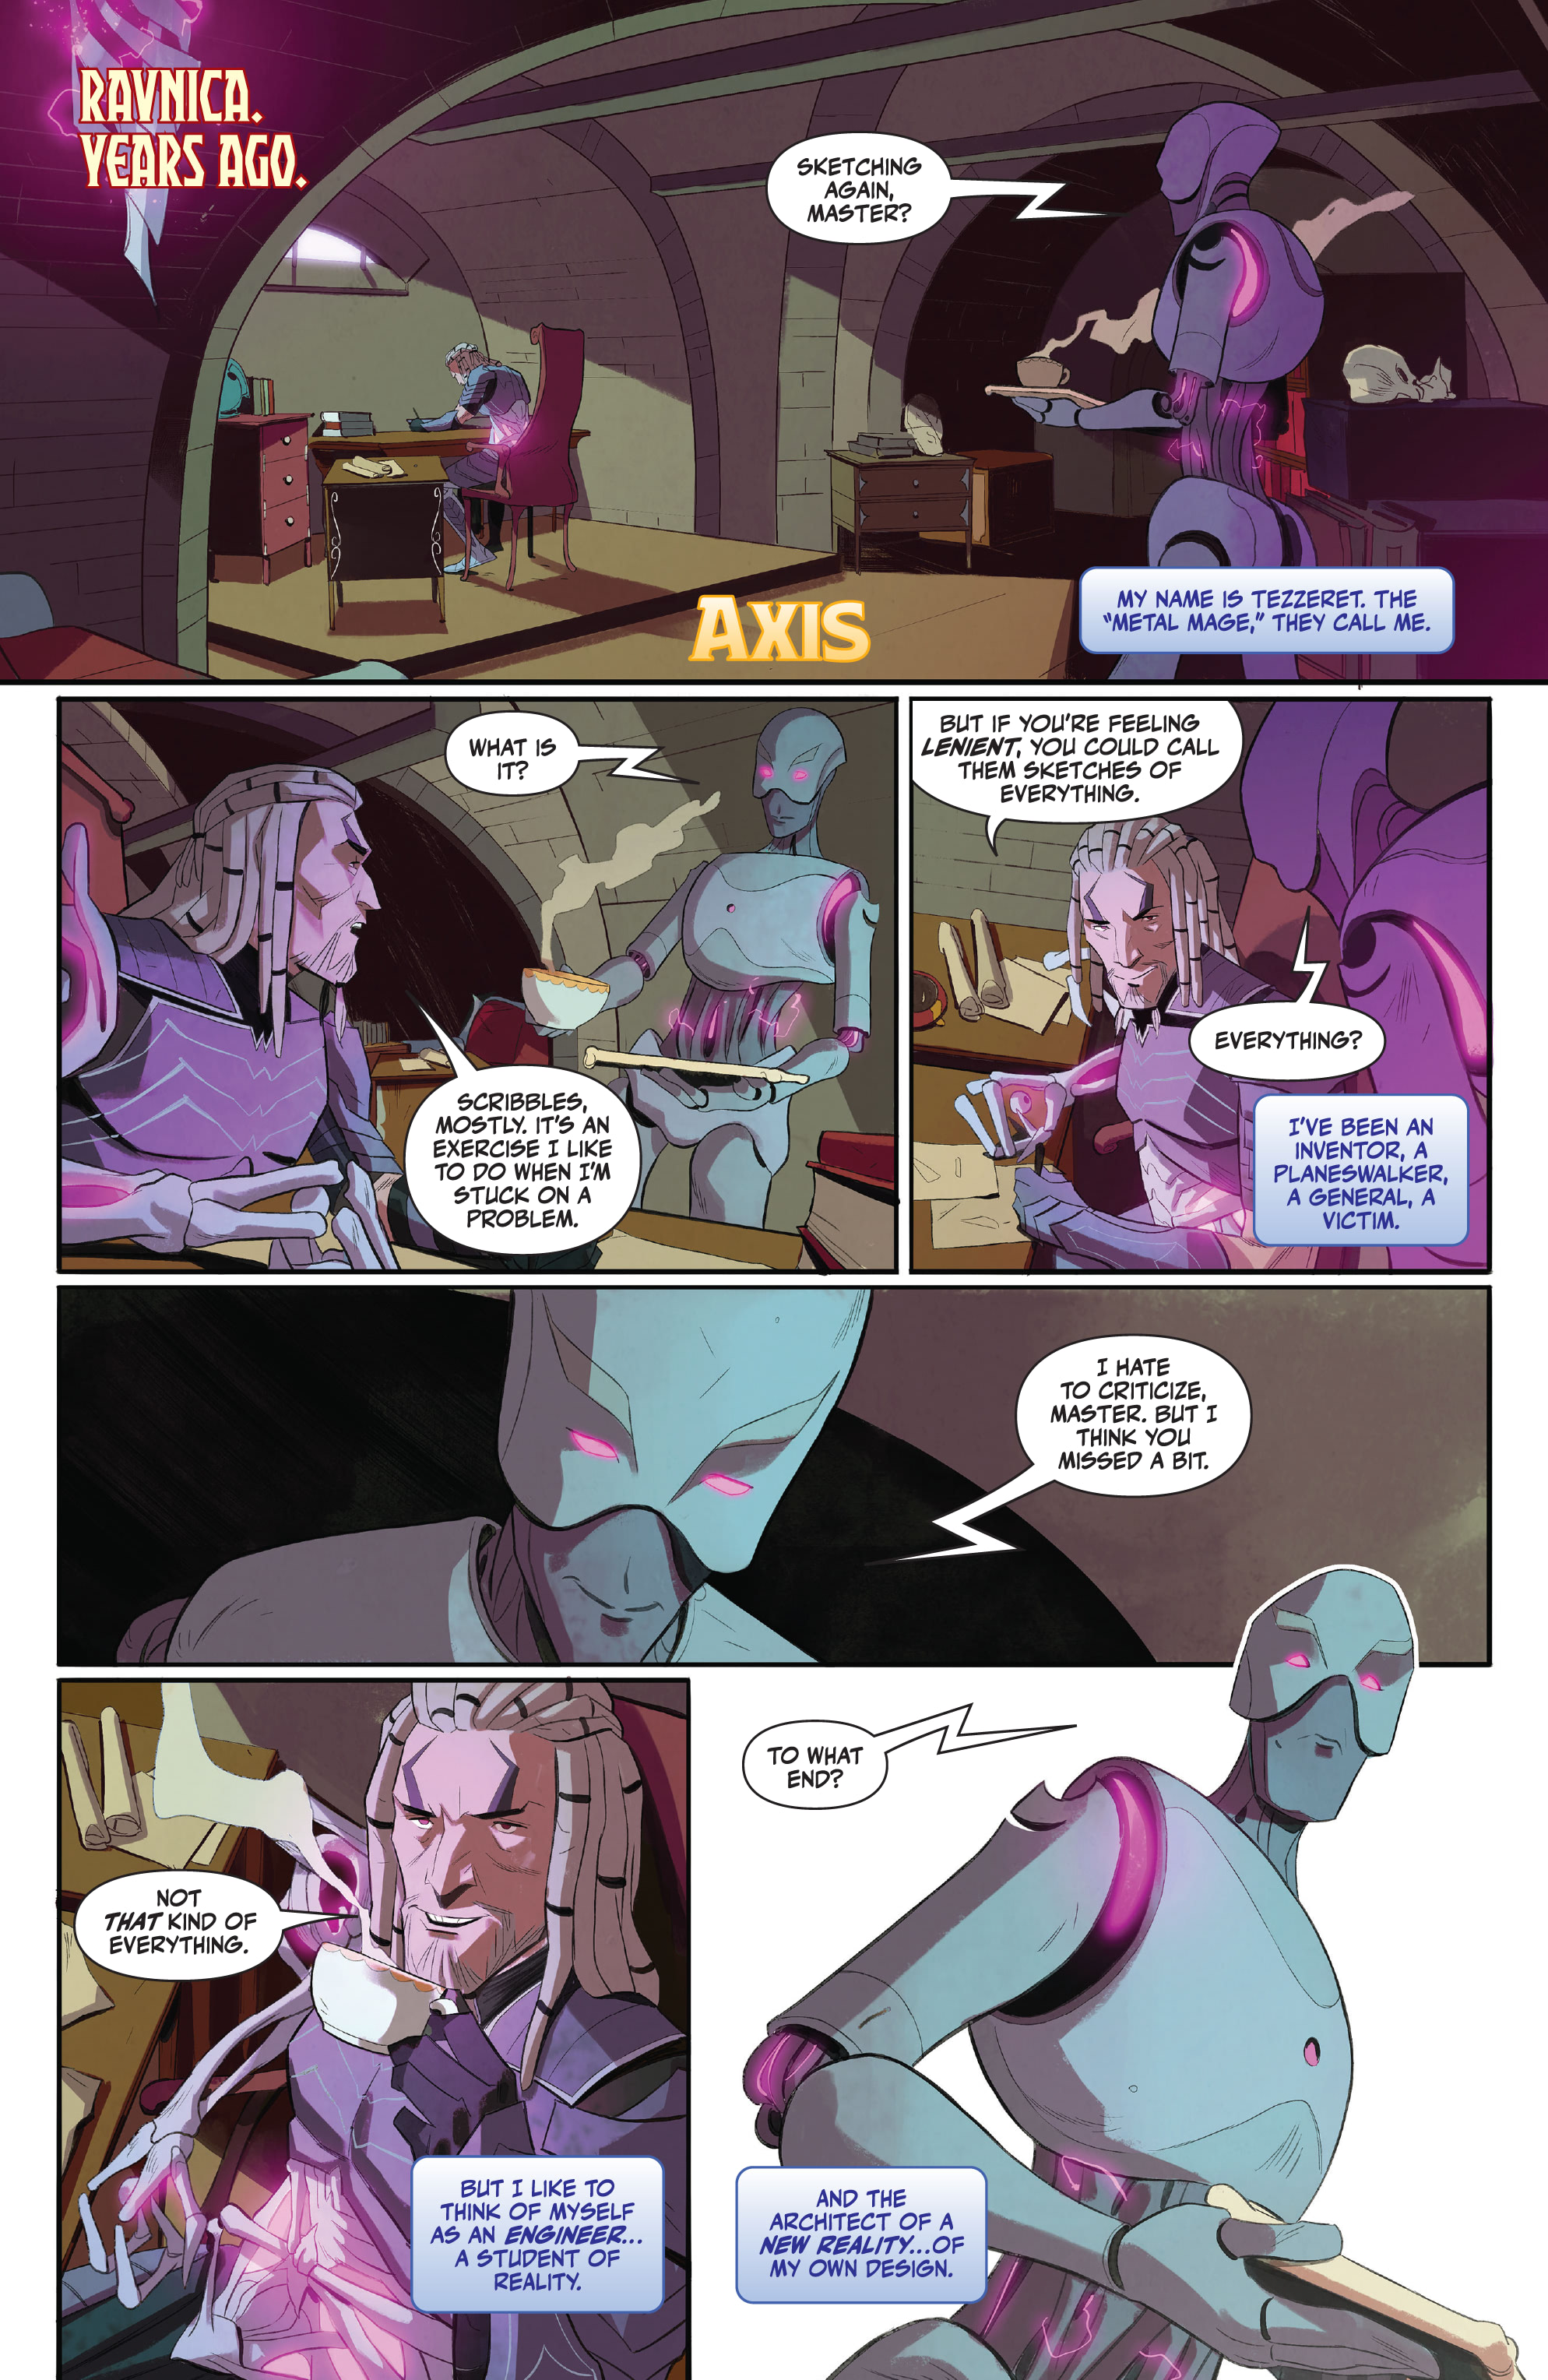 Magic: Master of Metal (2021-): Chapter 1 - Page 3